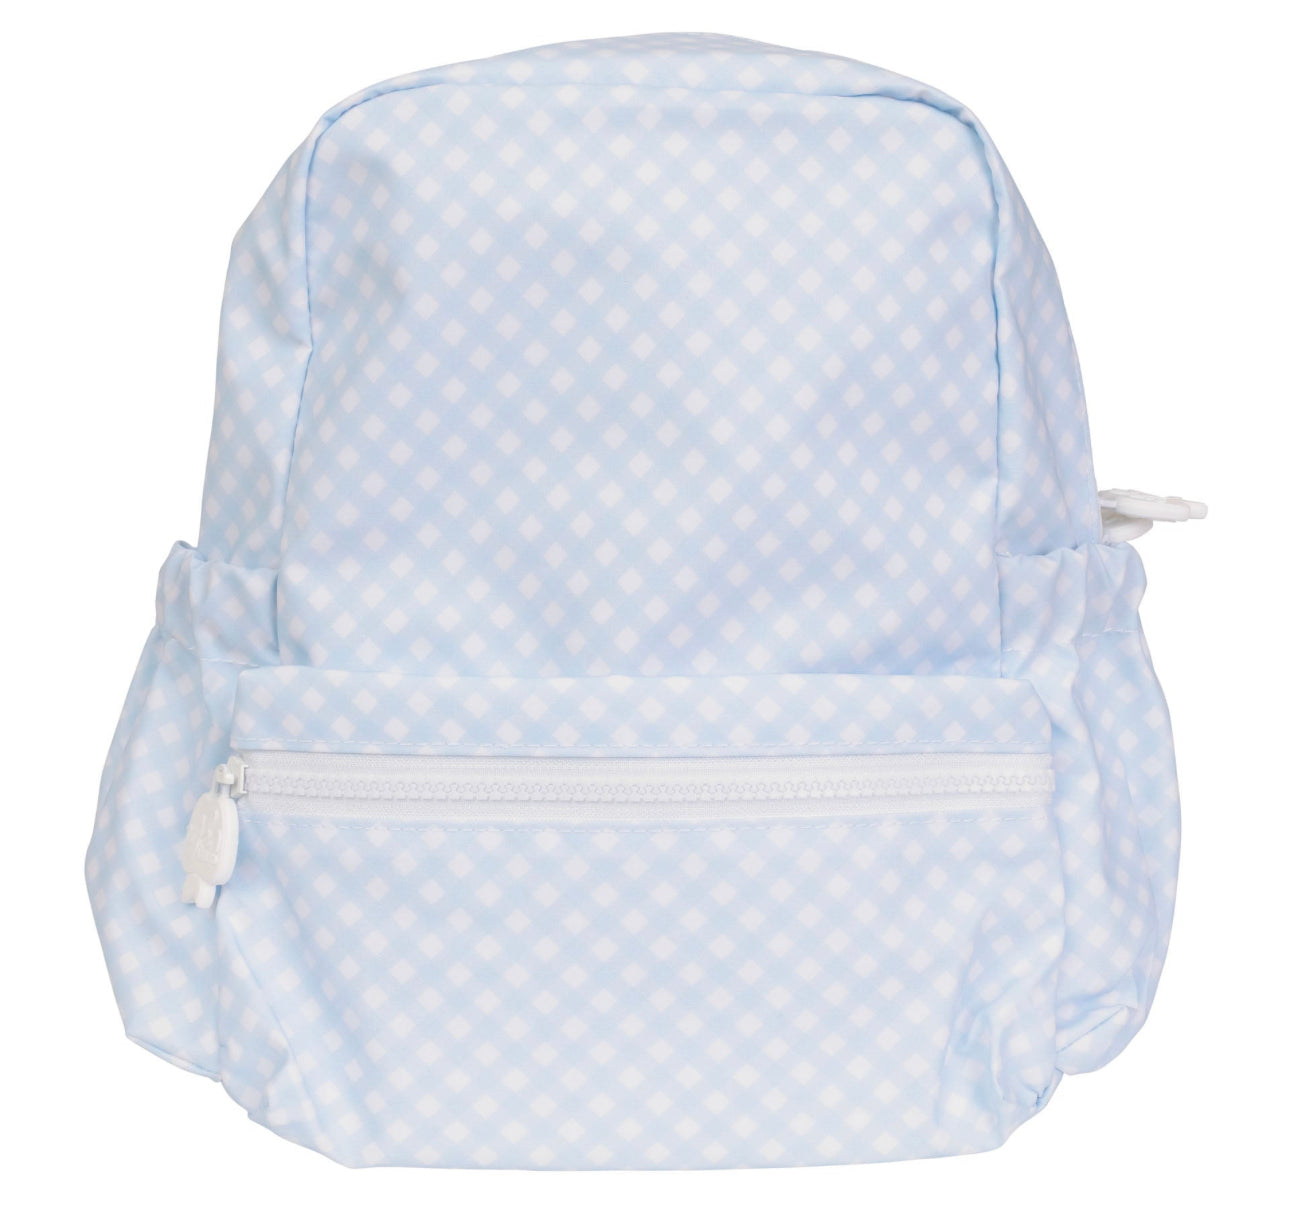 Apple of my Isla- Blue Gingham Backpack- Large